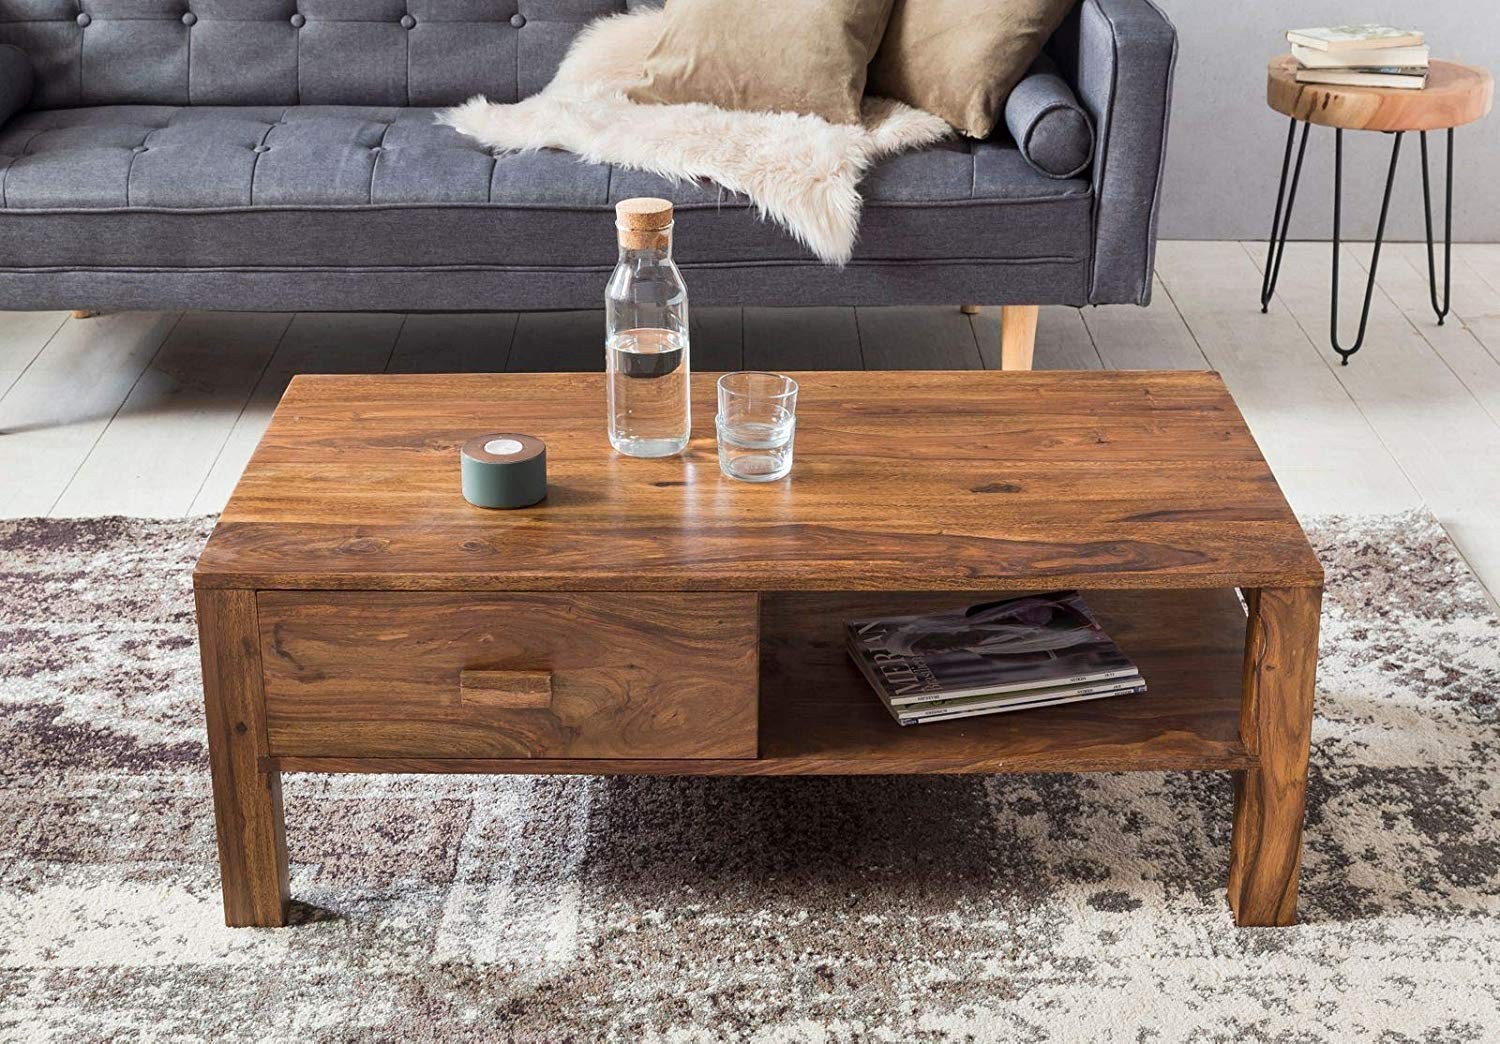 Hammond Wood Center Table | Coffee Table with 1 Drawer & 1 Shelve | Living Room Table with Drawer - Natural Honey Finish